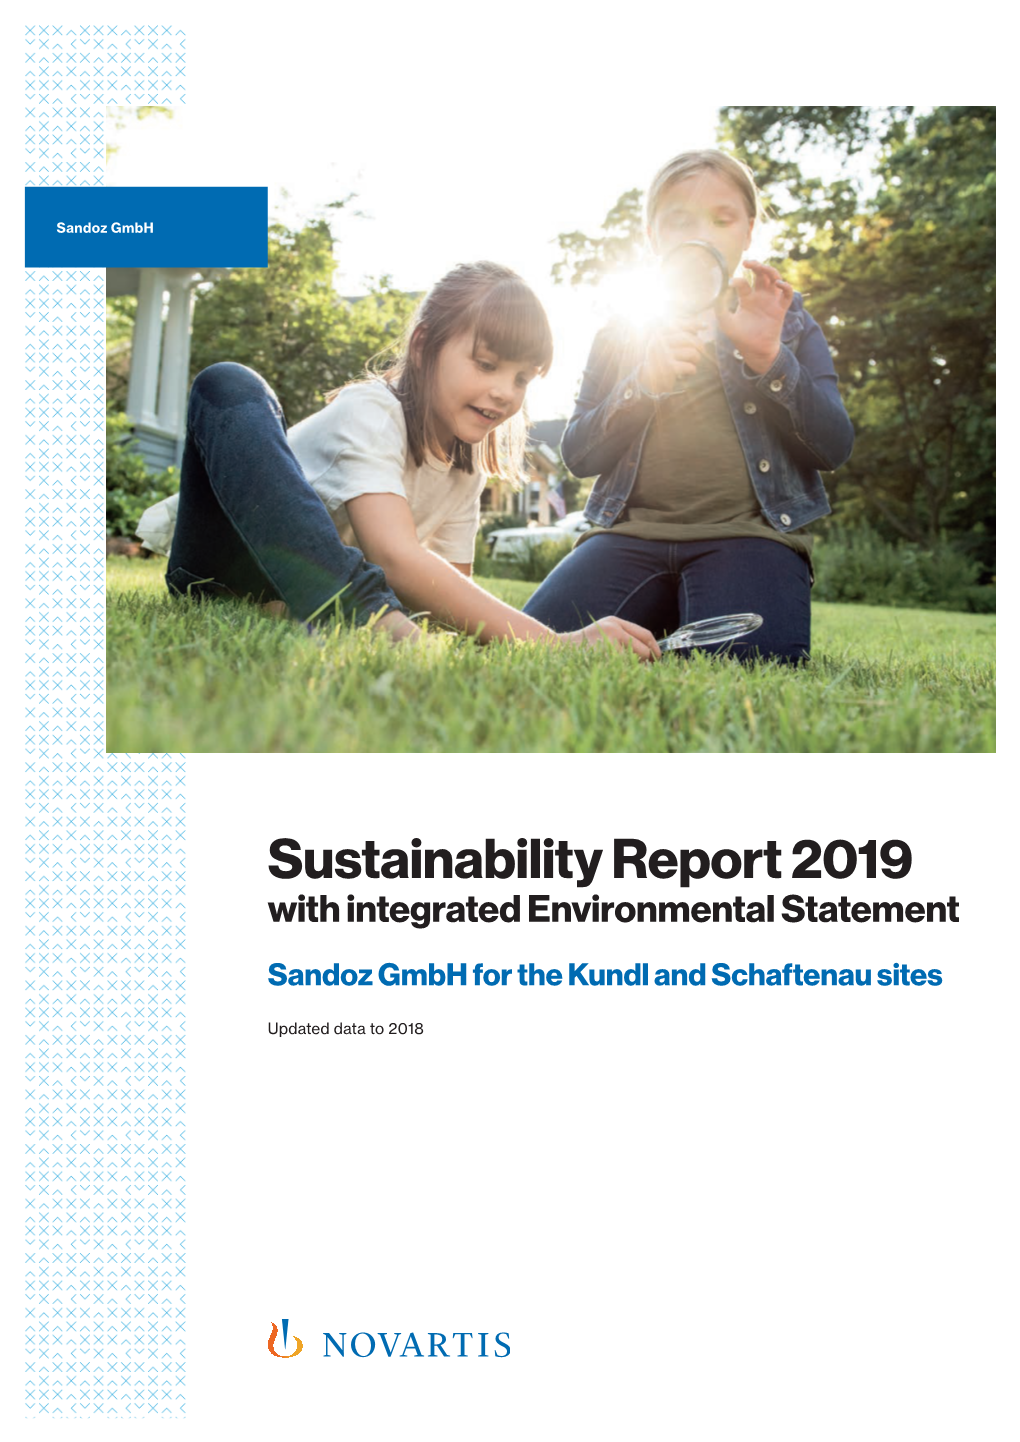 Sustainability Report 2019 with Integrated Environmental Statement Sandoz Gmbh for the Kundl and Schaftenau Sites